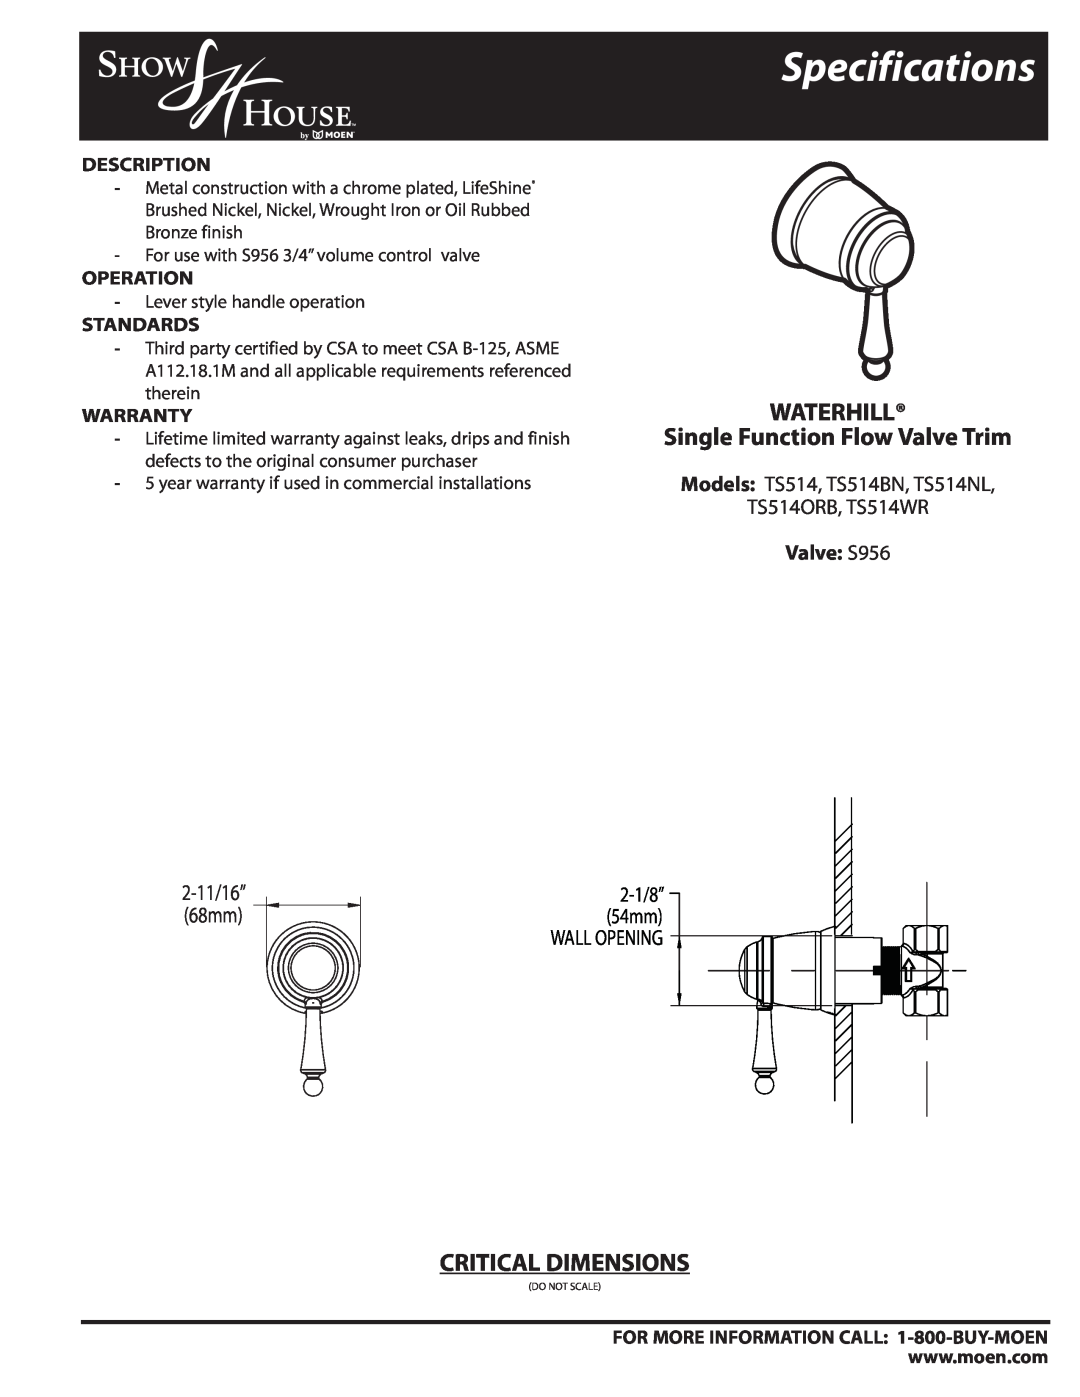 Moen TS514ORB specifications Specifications, WATERHILL Single Function Flow Valve Trim, Critical Dimensions, Valve S956 